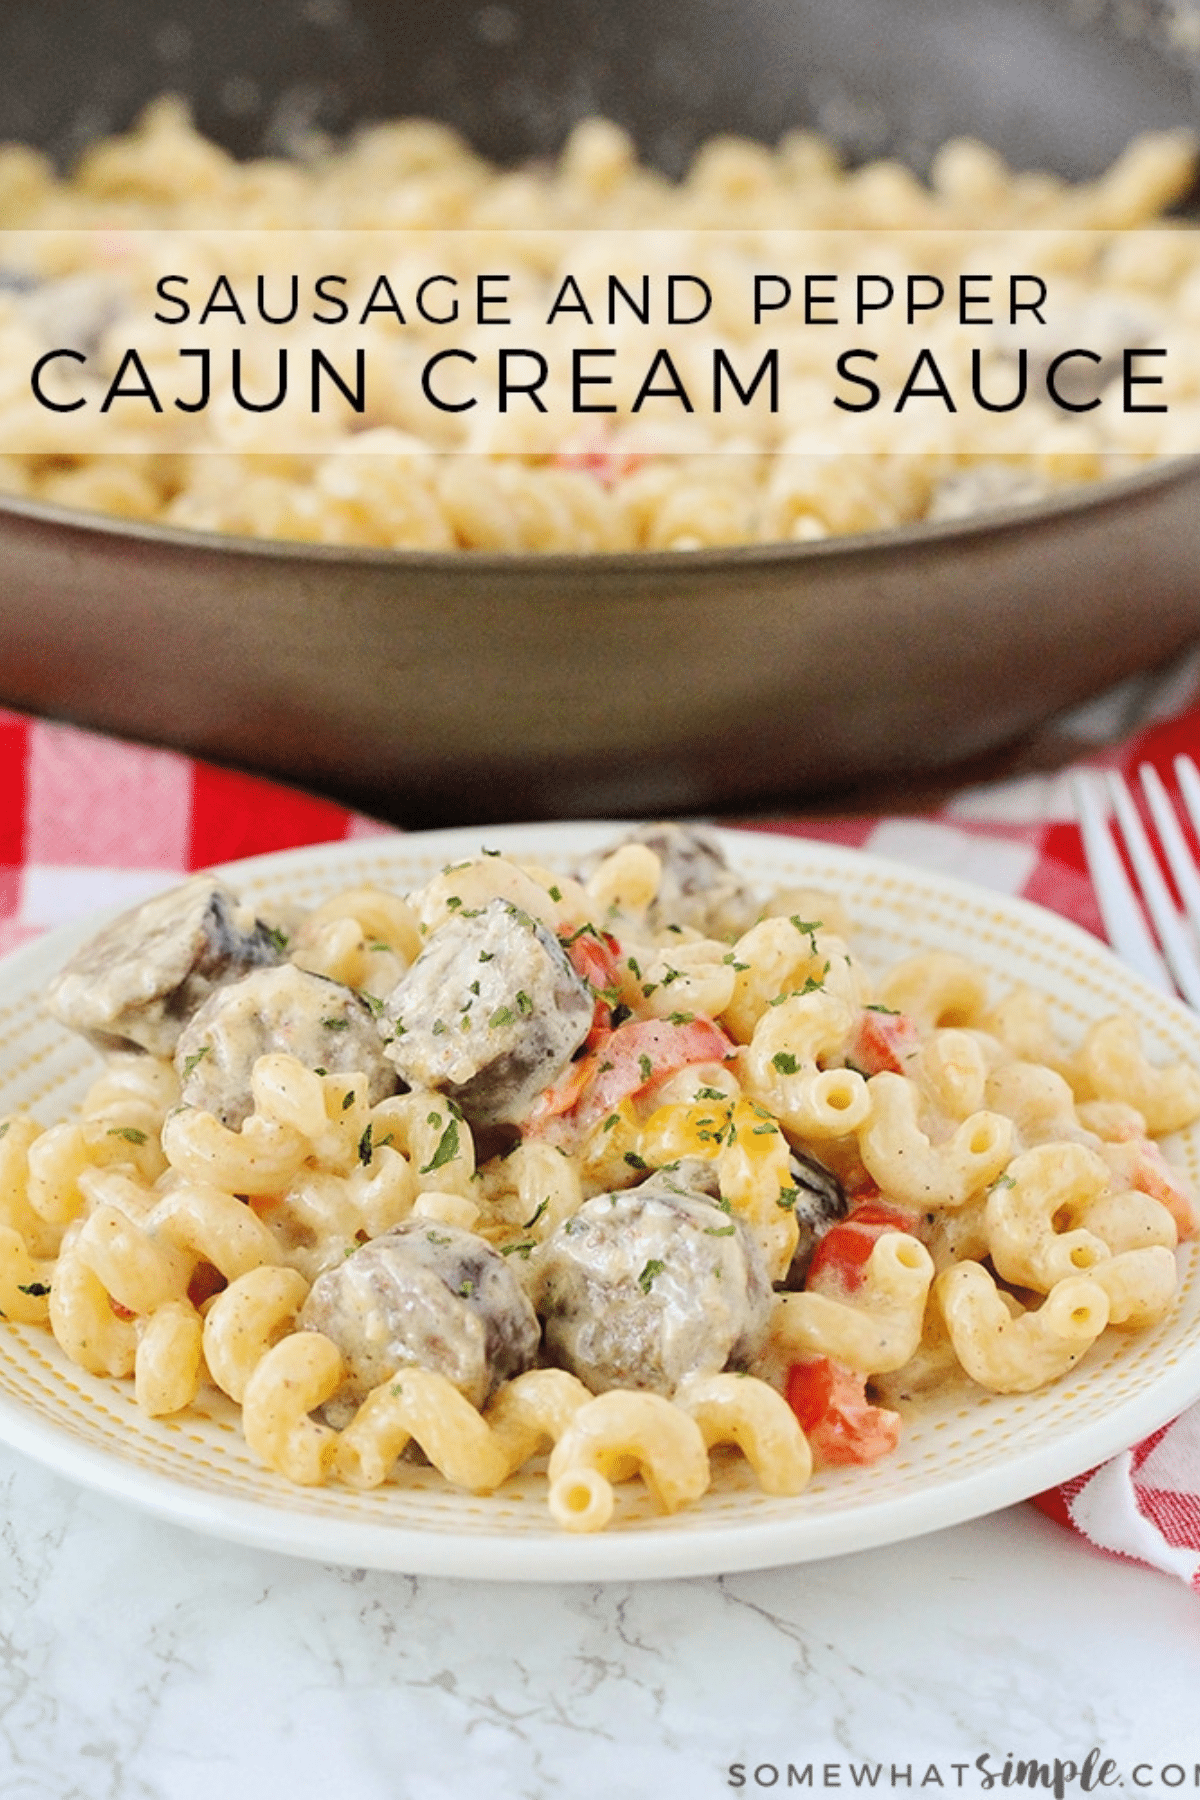 This rich and creamy Cajun Cream Sauce Pasta is quick and easy to prepare. Loaded with sausage and pepper this recipe is FULL of flavor! via @somewhatsimple